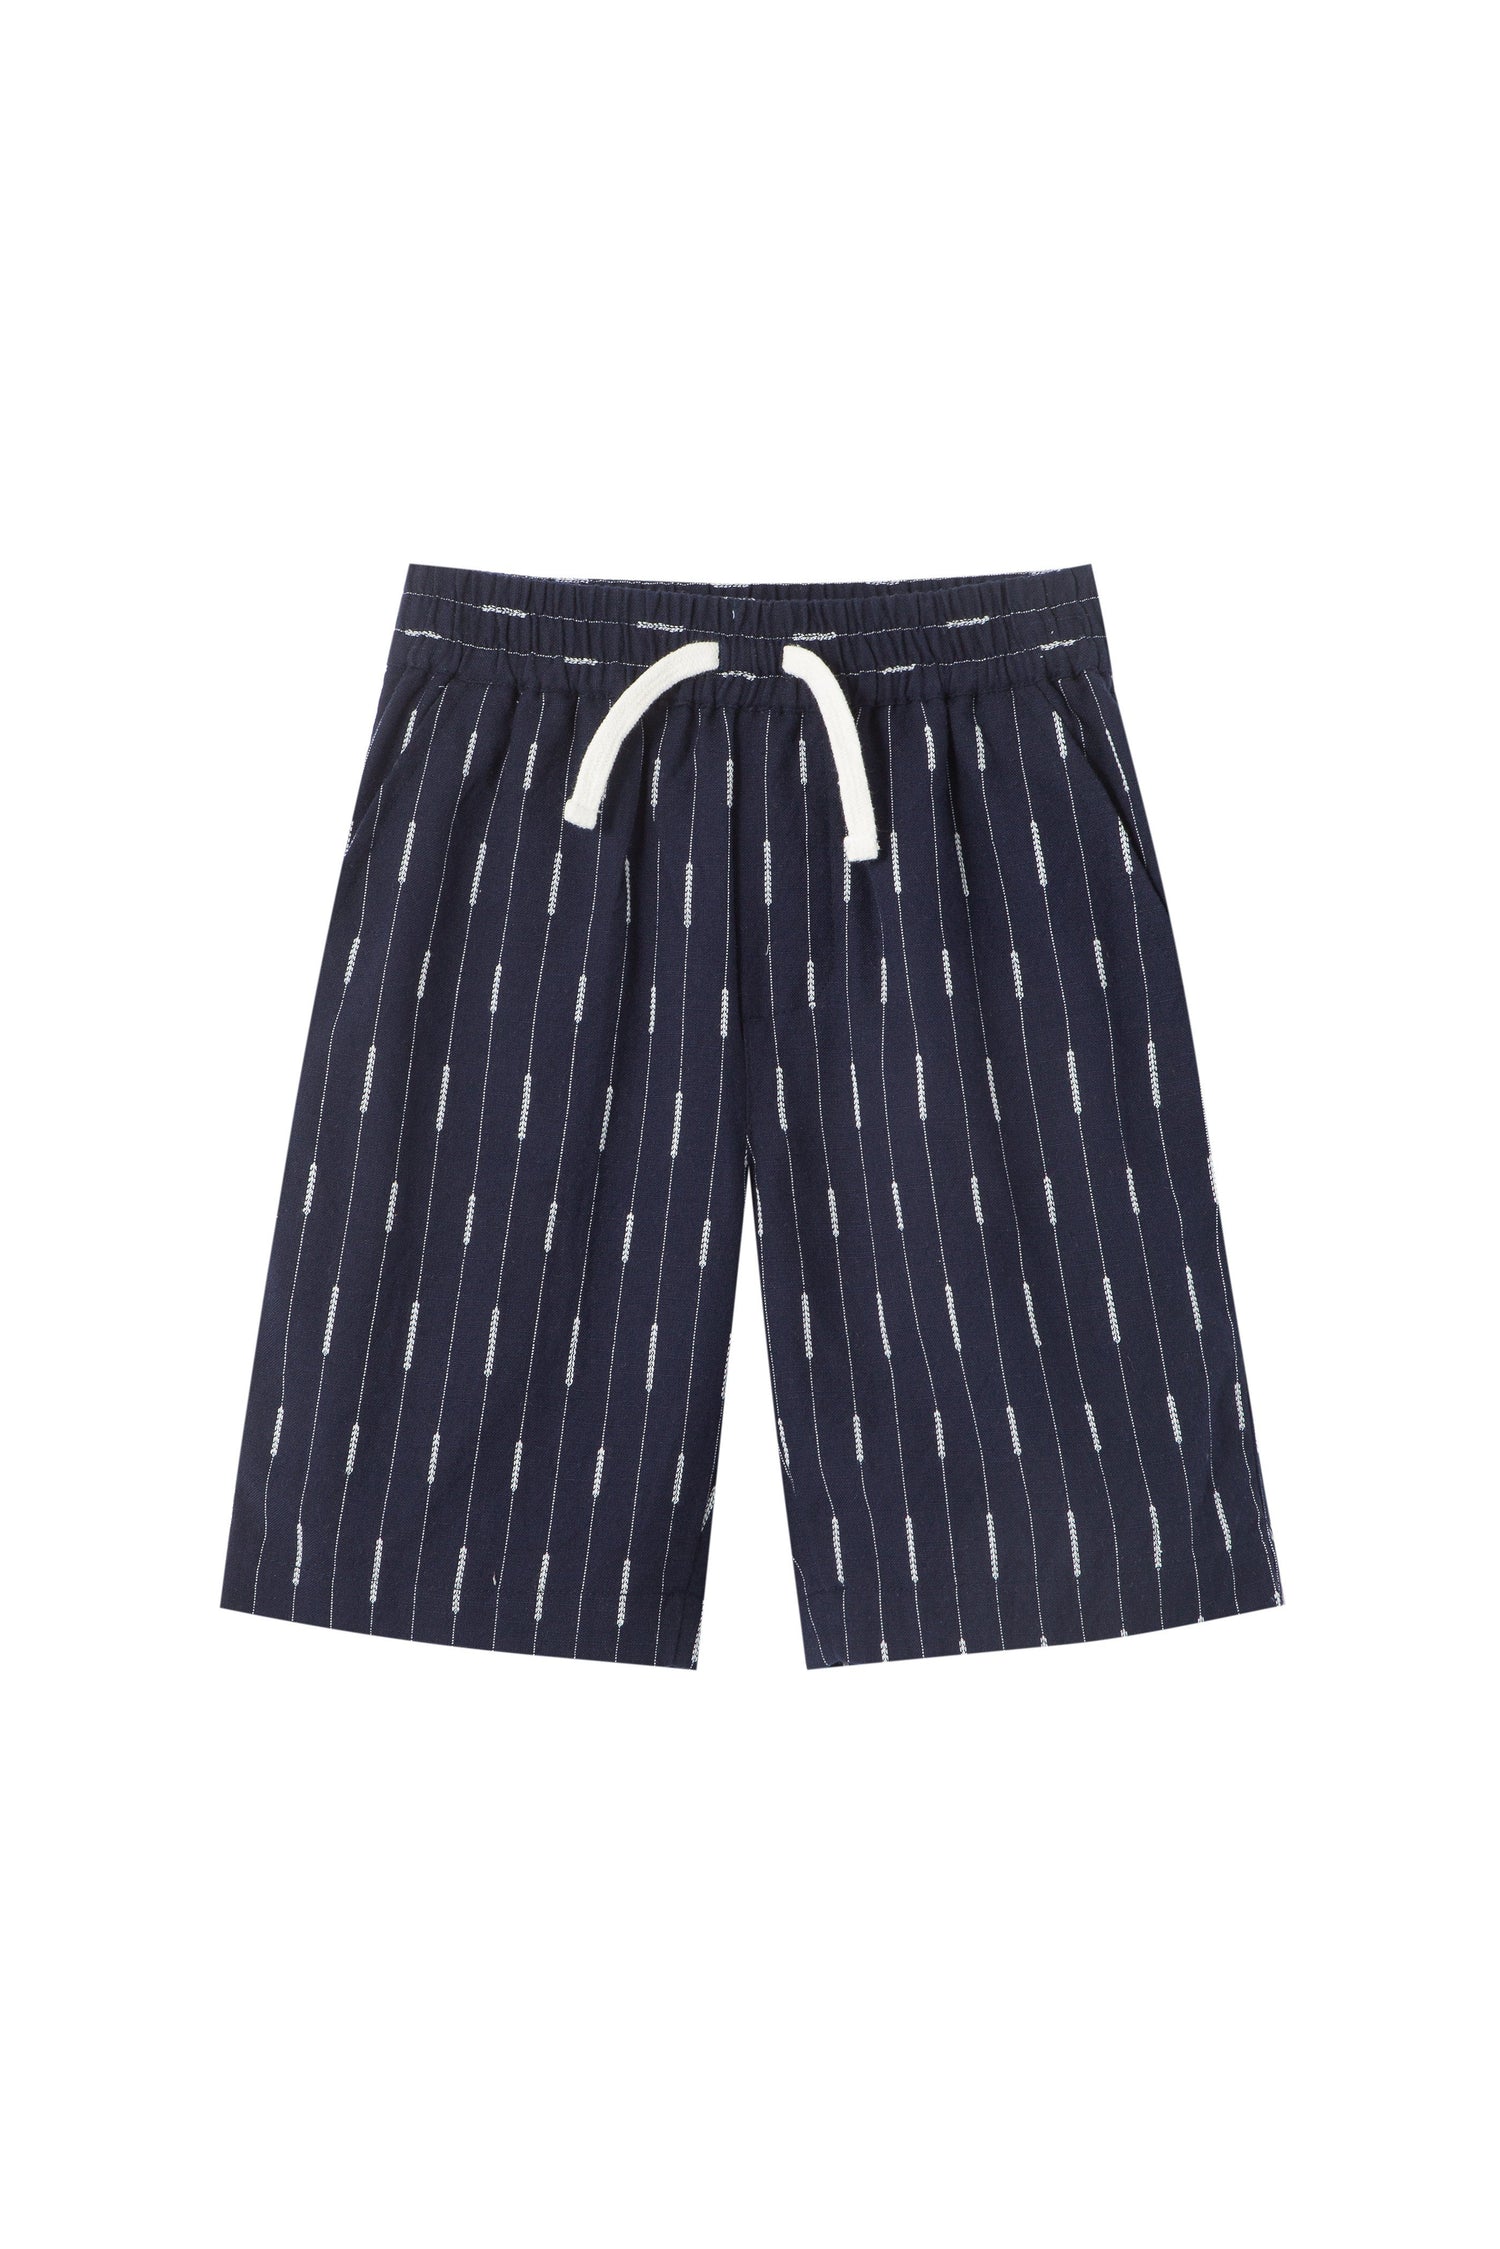 Navy blue elastic waist pull on shorts with Faux drawstring and embroidered white stripes. 